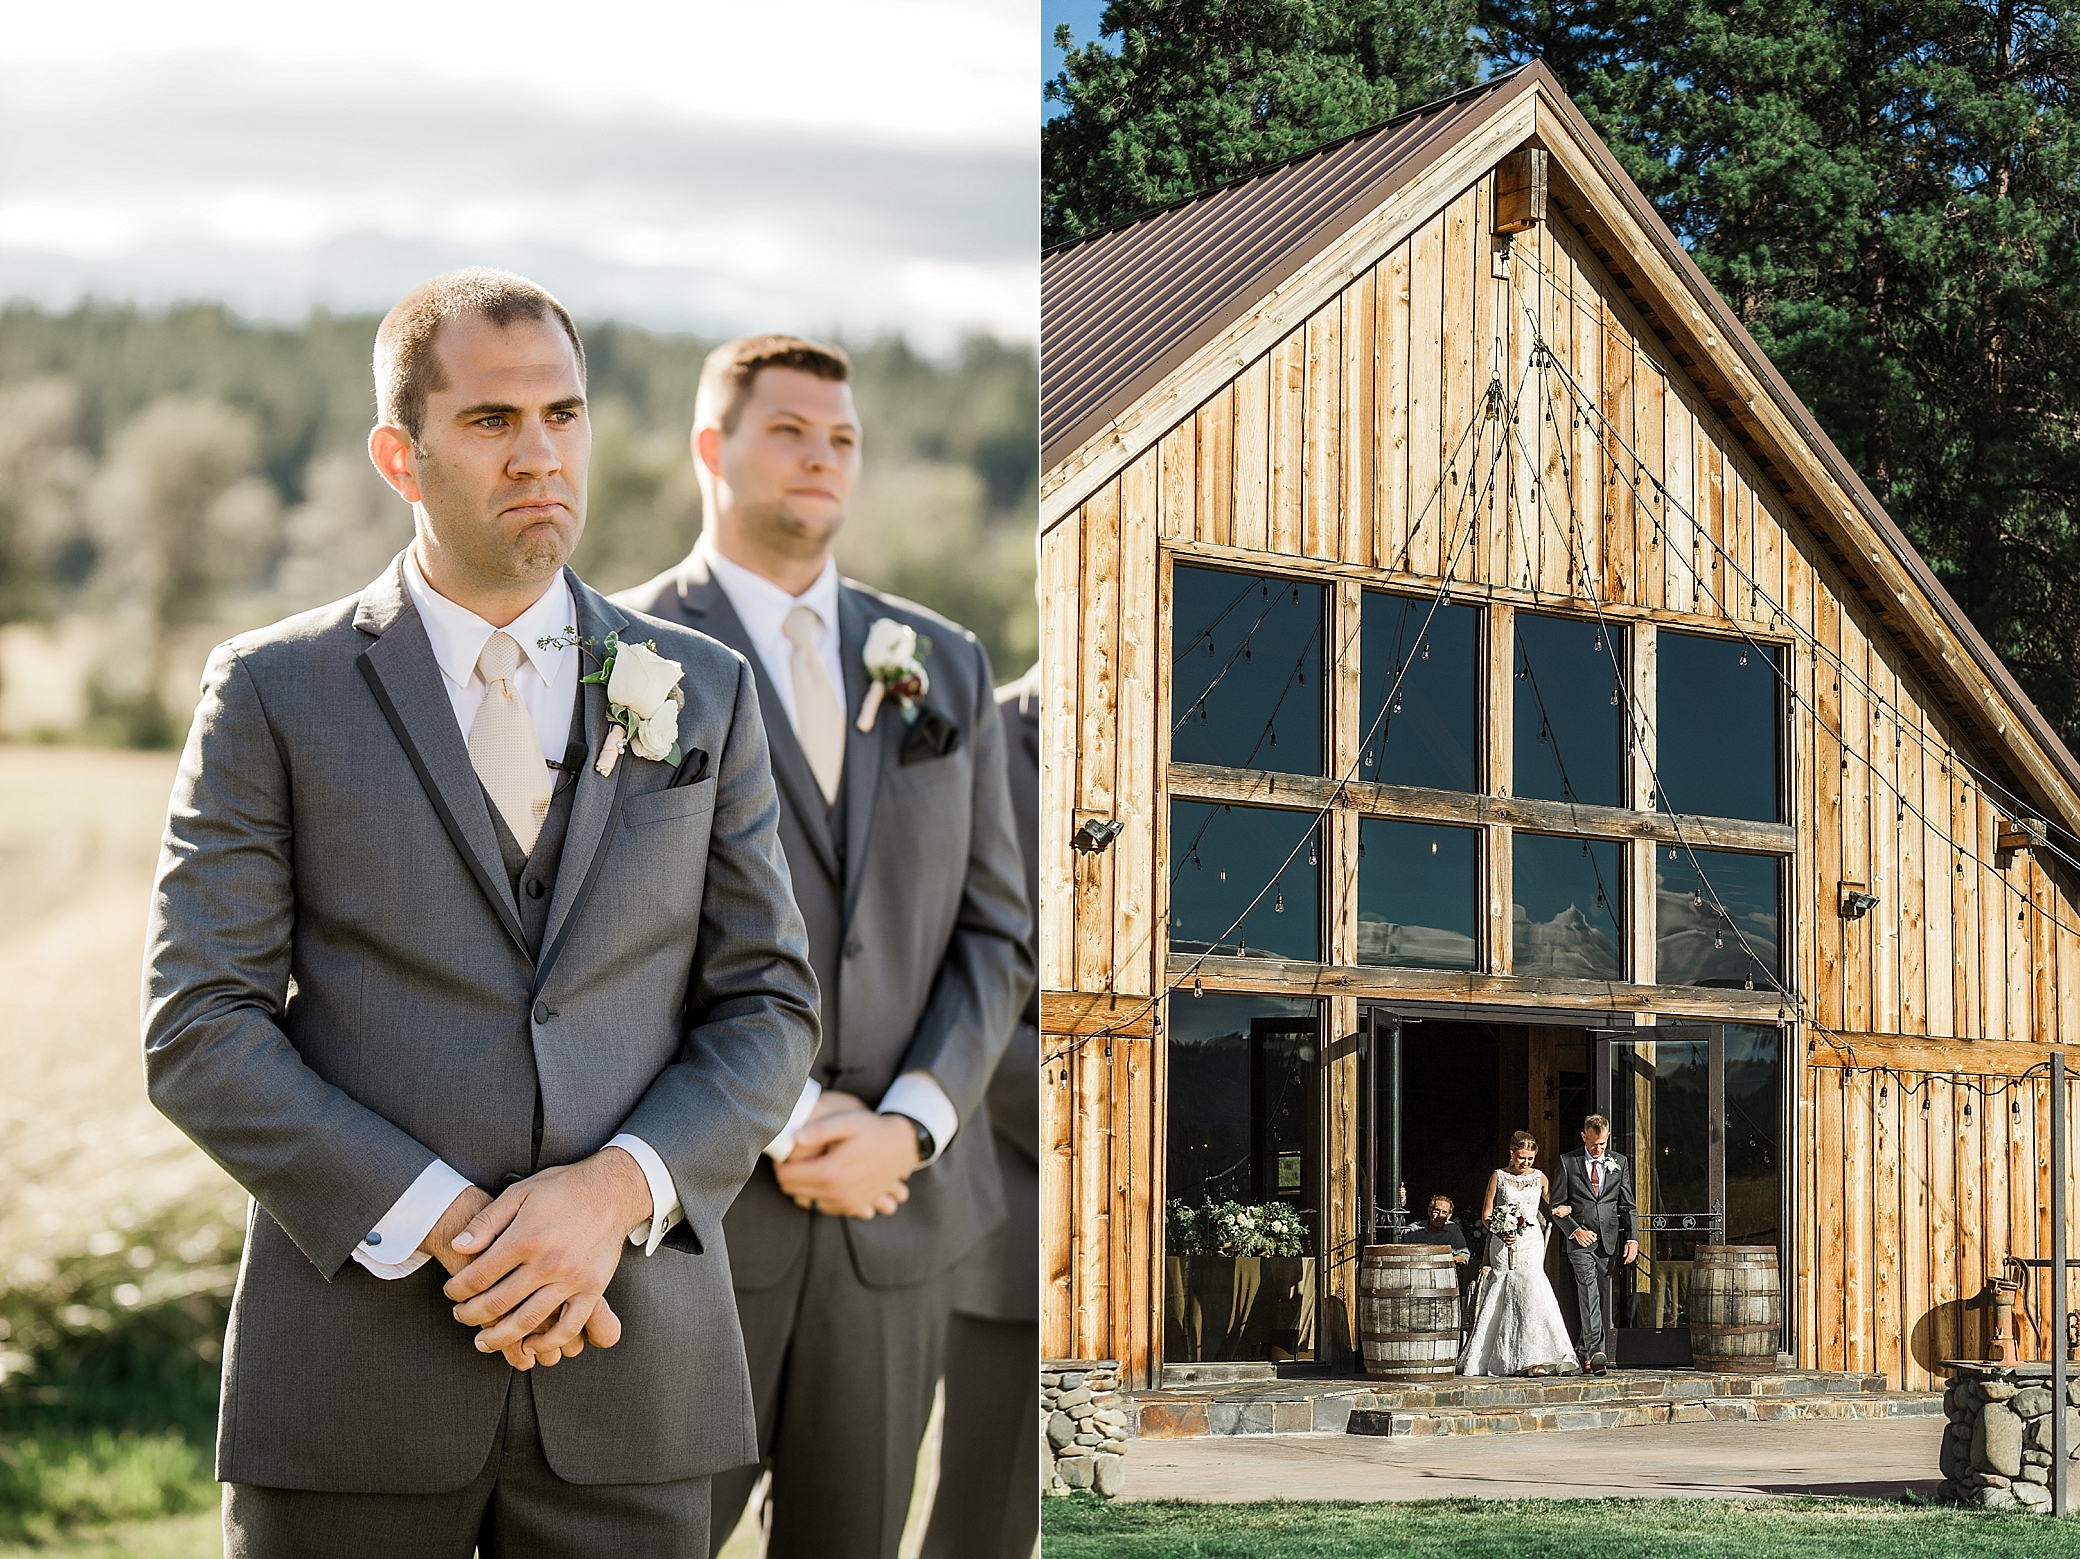 Bride walking down the aisle at the Cattle Barn in Cle Elum, WA | Megan Montalvo Photography 